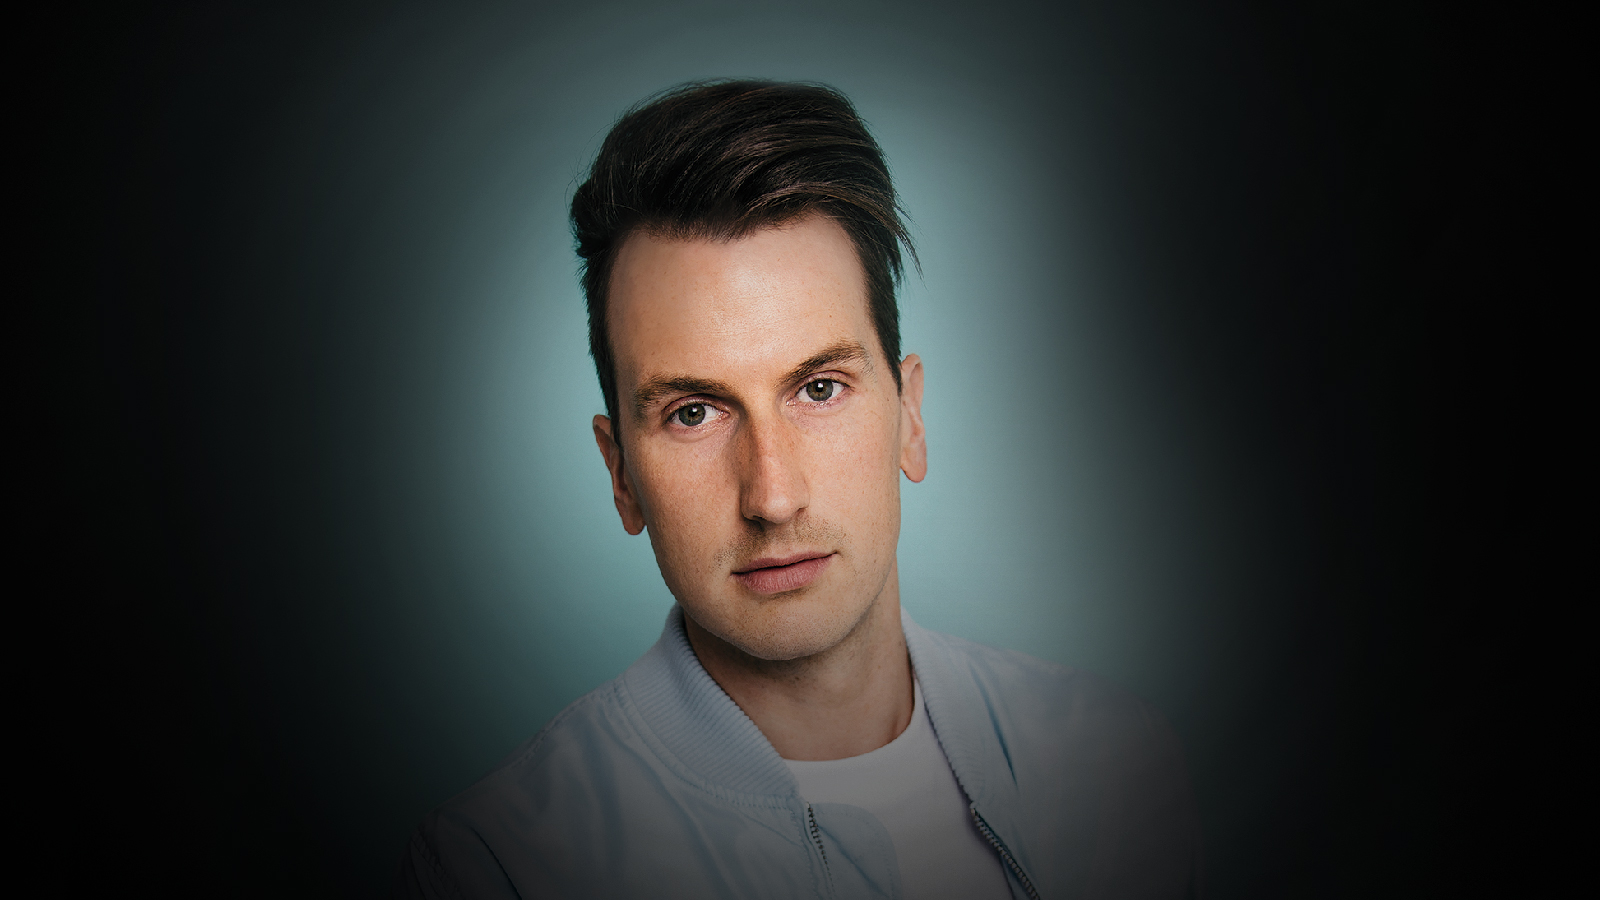 Russell Dickerson Tickets